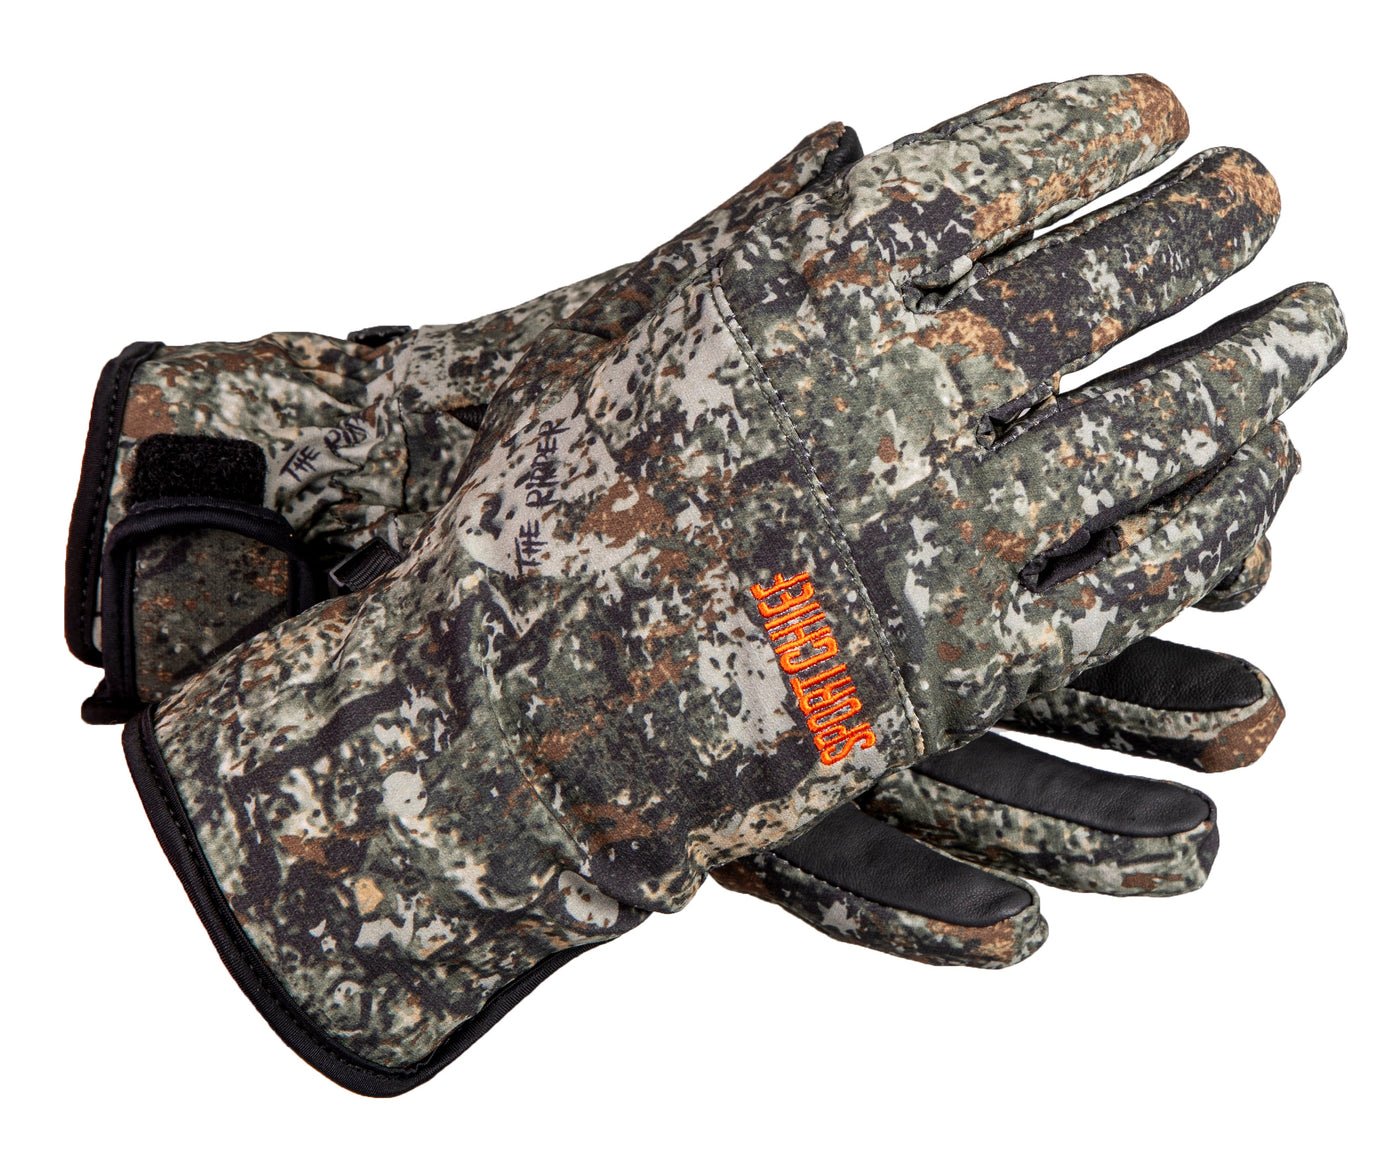 Women's Hunting Gloves "Trapline" camo The Ripper by Sportchief